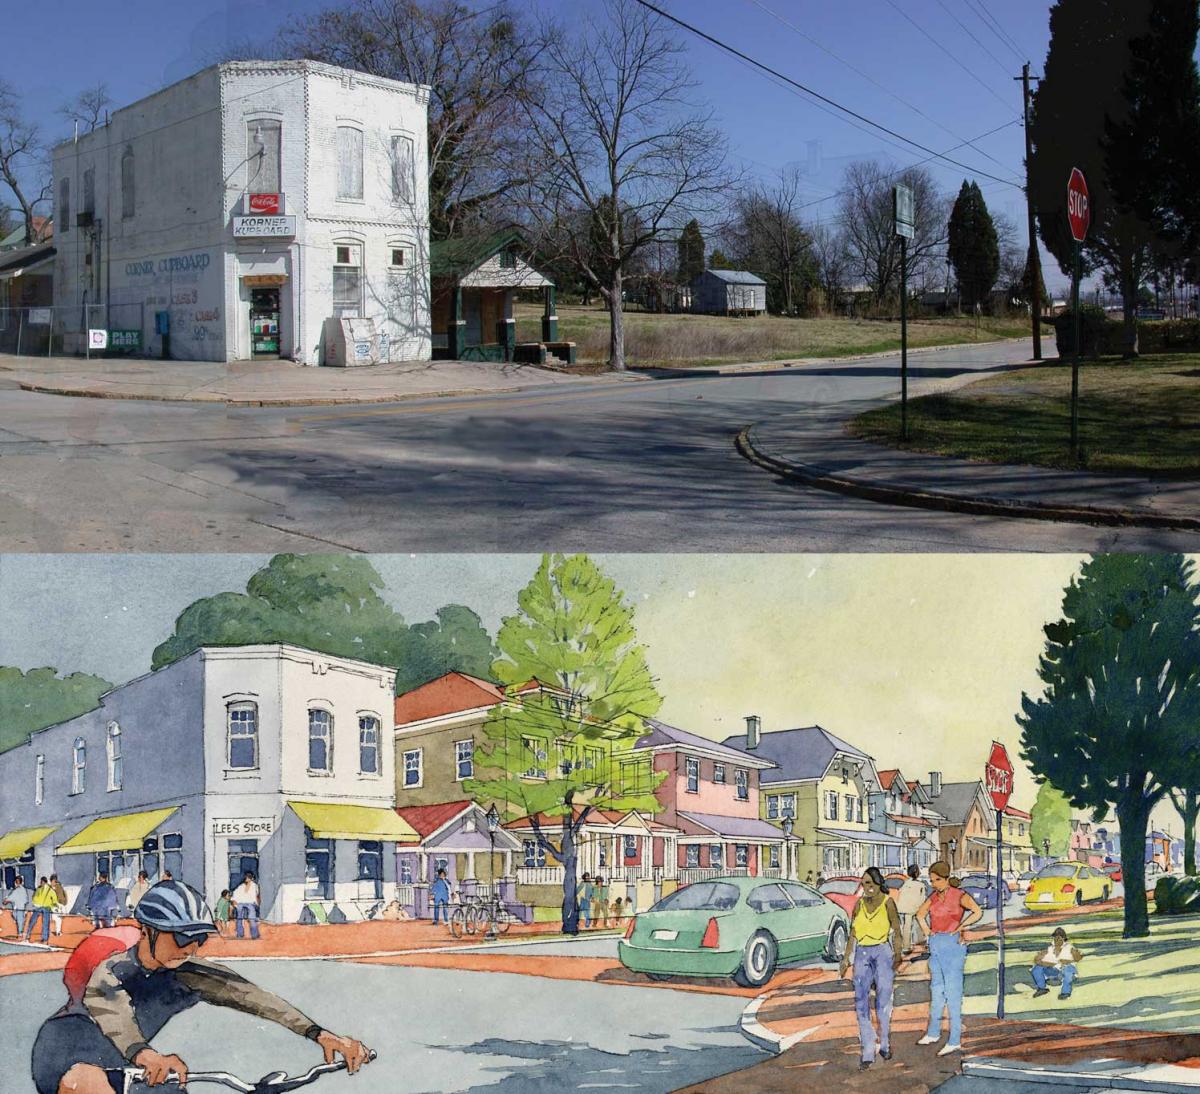 Block with vacant houses, early 2000s, top. Rendering of infill, bottom, by Dhiru Thadani.